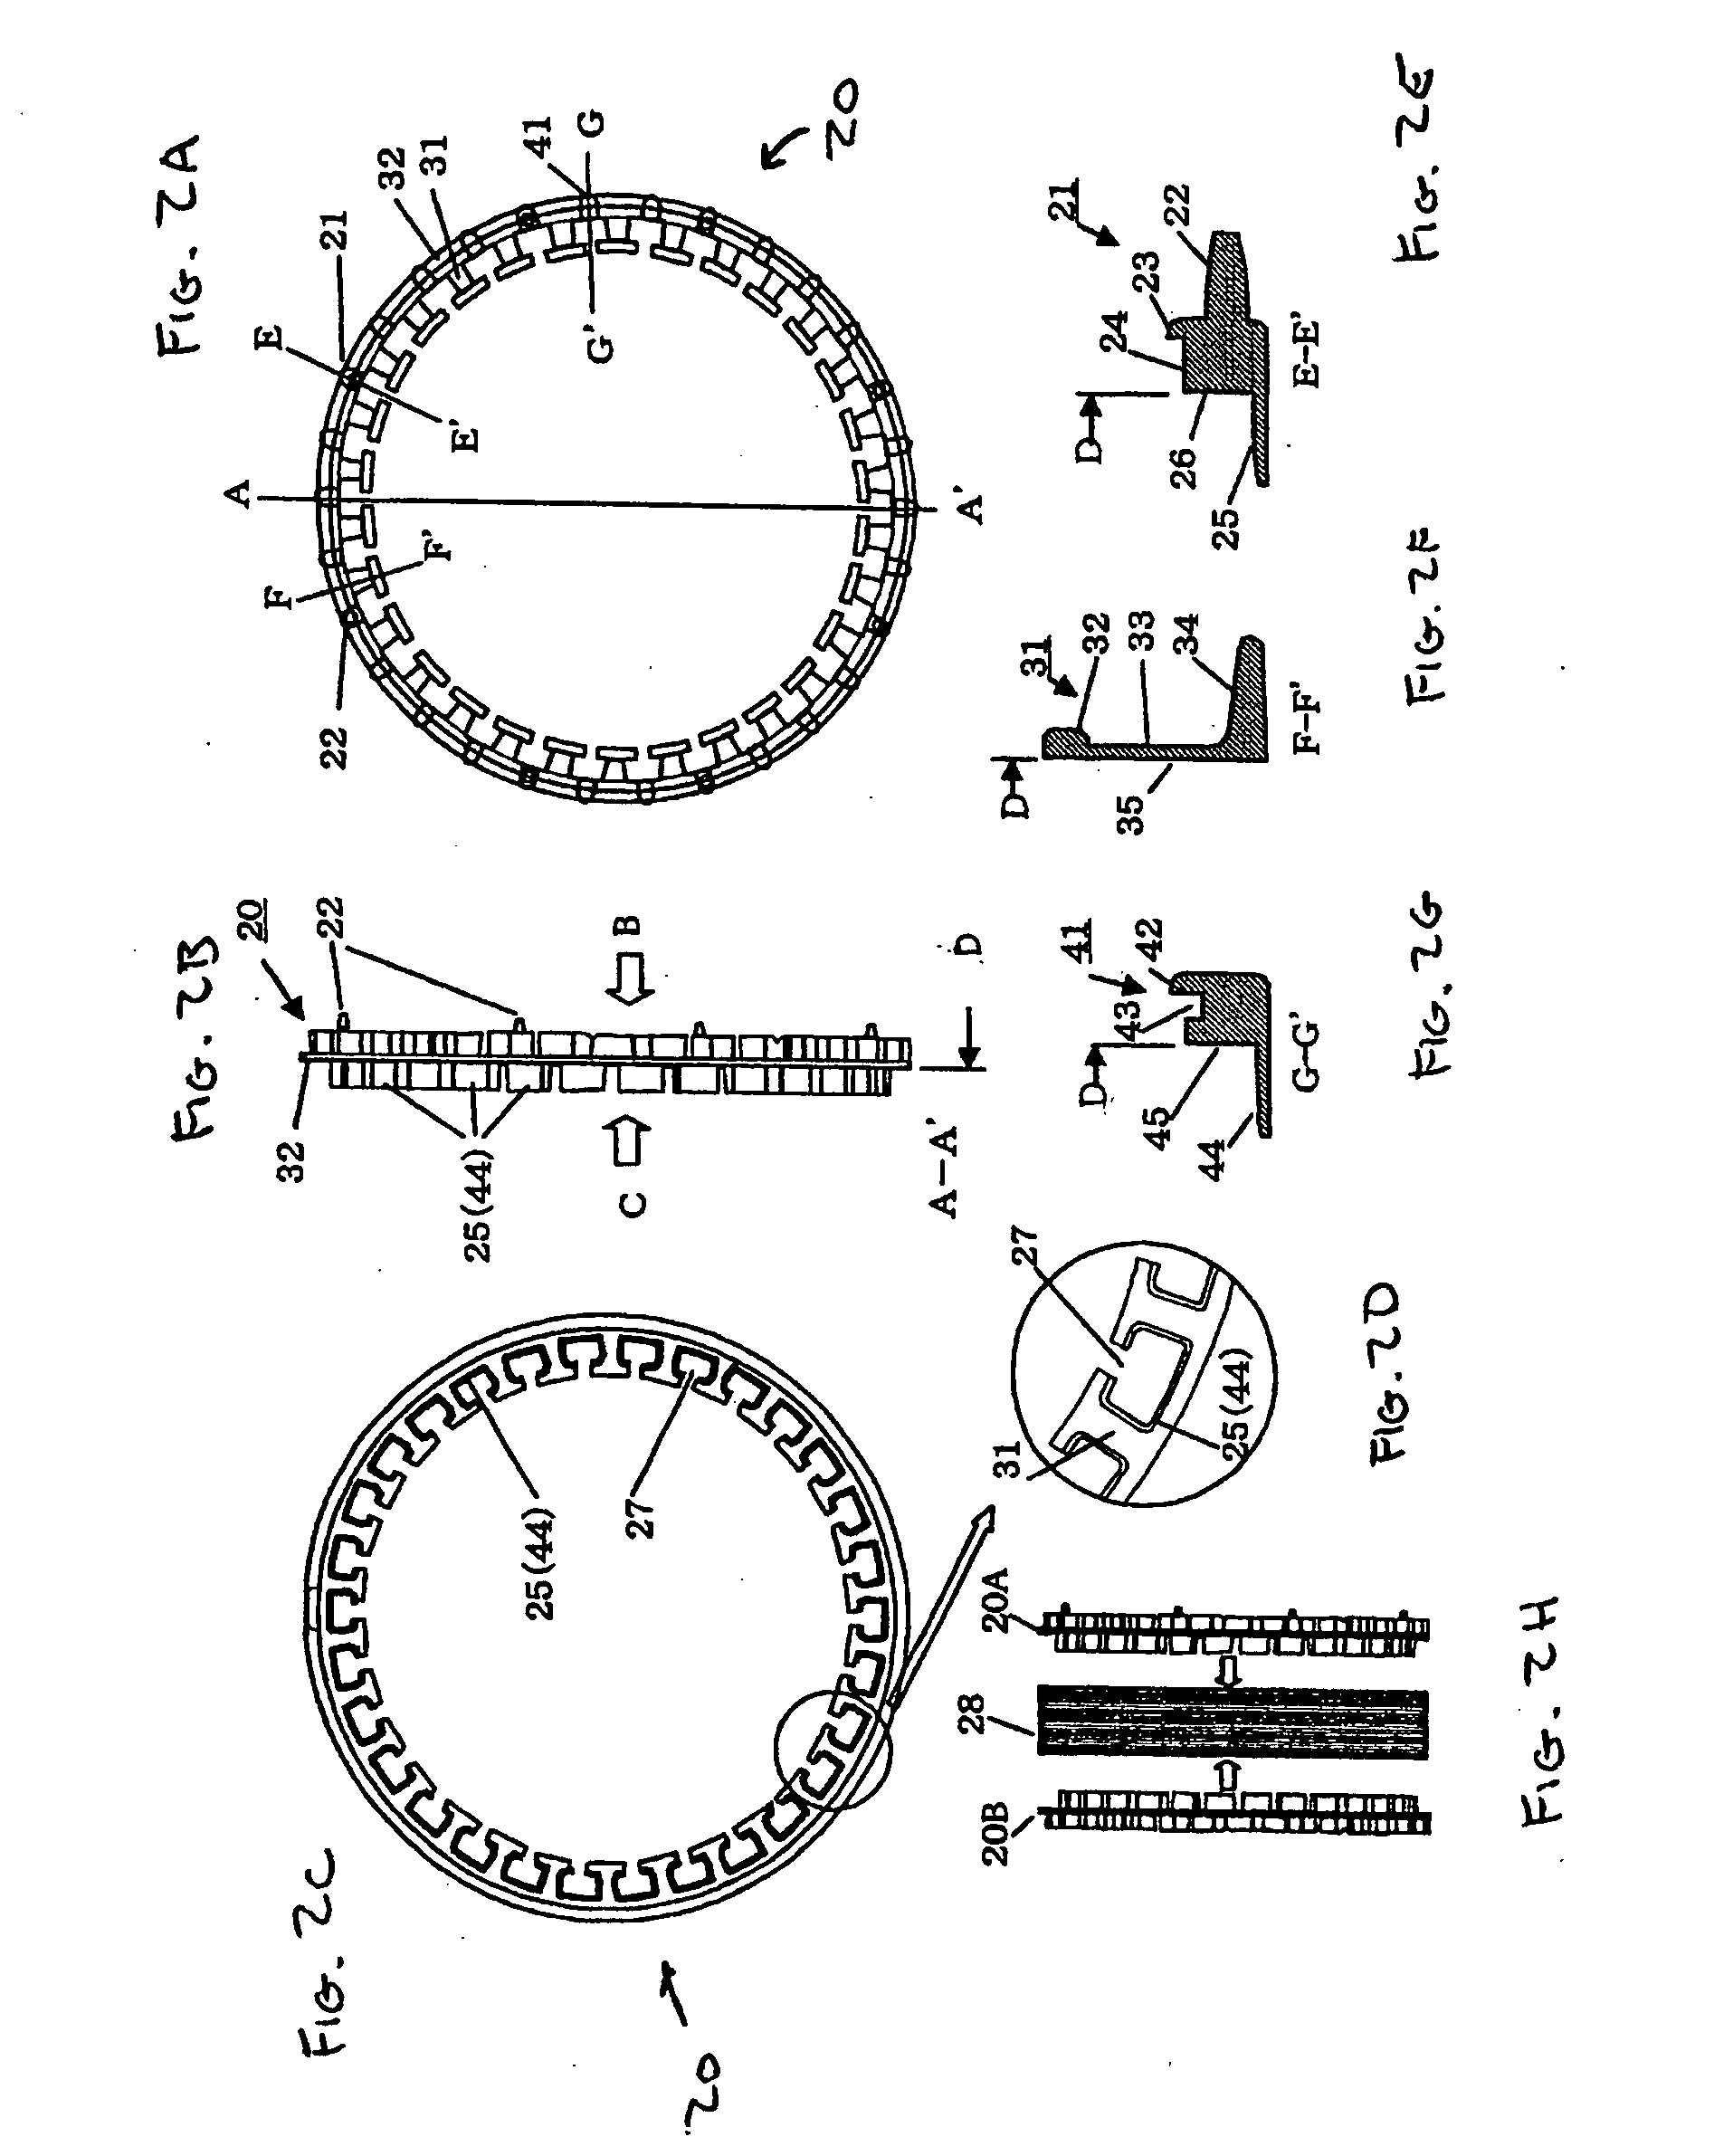 Multi-resolver rotation angle sensor with integrated housing